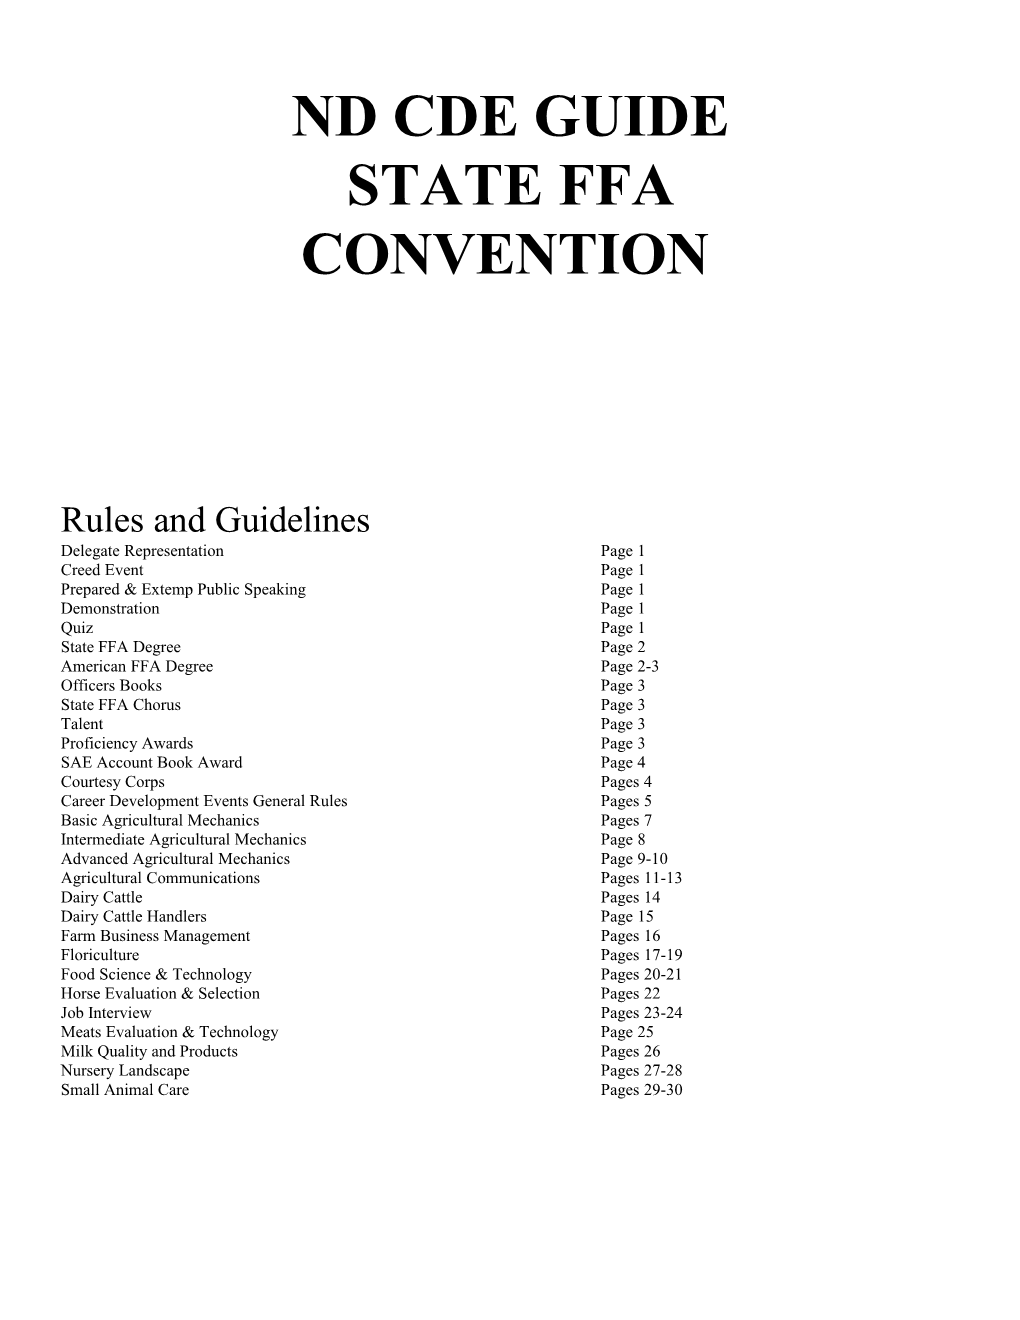 Rulesand Guidelines